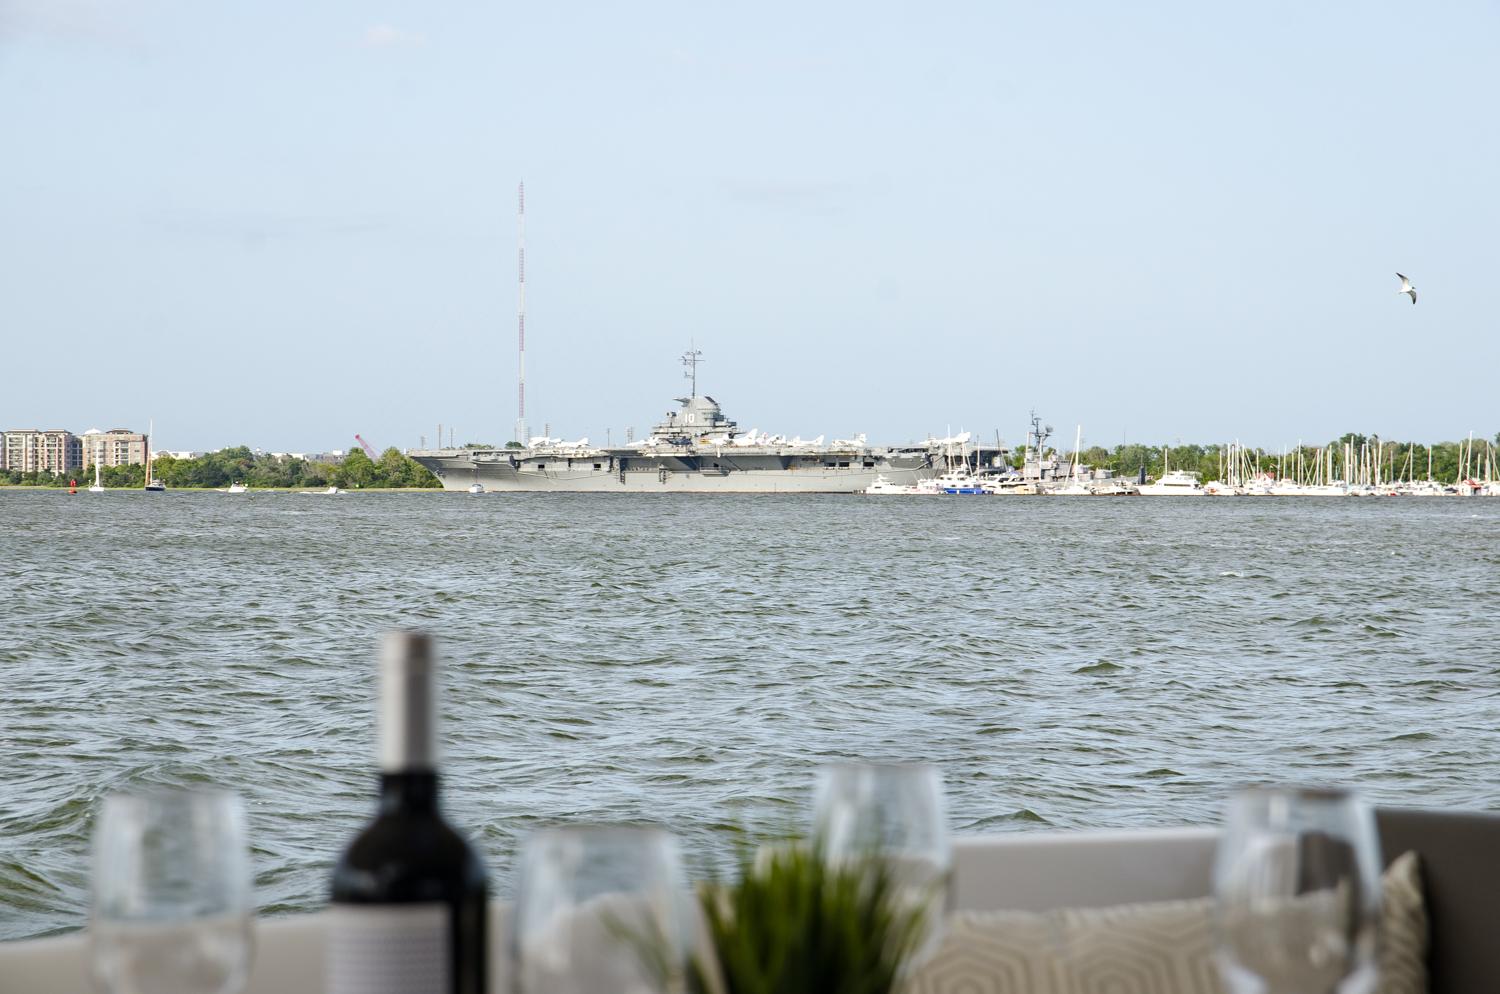 See the USS Yorktown as we depart on your Charleston Sailing adventure.